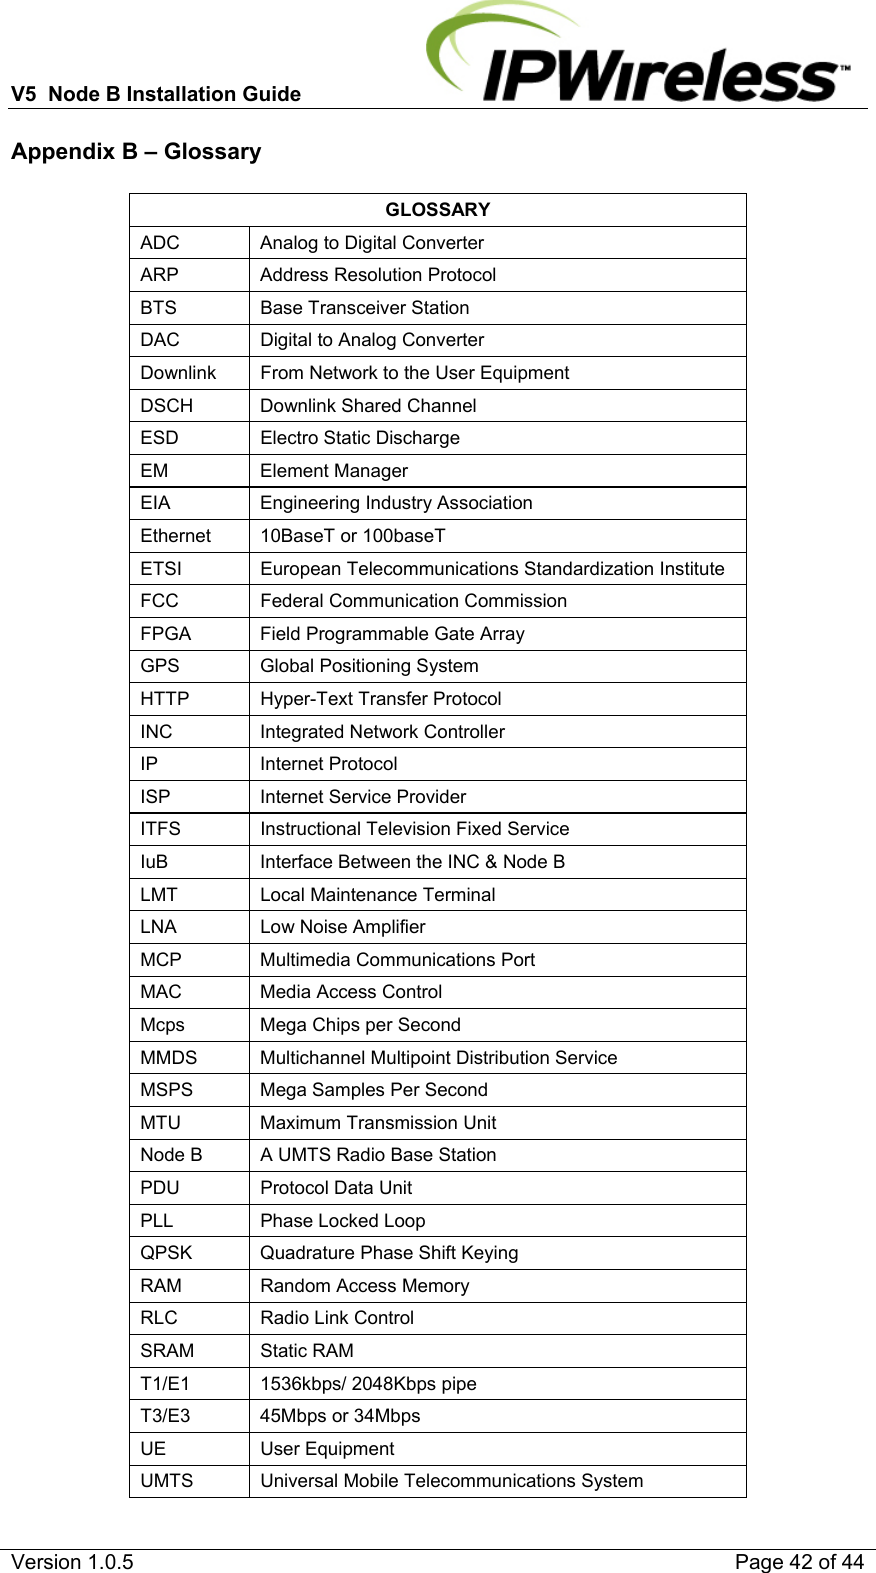 V5  Node B Installation Guide                           Version 1.0.5    Page 42 of 44 Appendix B – Glossary  GLOSSARY ADC   Analog to Digital Converter ARP   Address Resolution Protocol BTS   Base Transceiver Station DAC   Digital to Analog Converter Downlink   From Network to the User Equipment DSCH   Downlink Shared Channel ESD   Electro Static Discharge EM   Element Manager EIA   Engineering Industry Association Ethernet  10BaseT or 100baseT ETSI   European Telecommunications Standardization Institute FCC   Federal Communication Commission FPGA   Field Programmable Gate Array GPS   Global Positioning System HTTP    Hyper-Text Transfer Protocol INC   Integrated Network Controller IP   Internet Protocol ISP   Internet Service Provider ITFS   Instructional Television Fixed Service IuB   Interface Between the INC &amp; Node B LMT   Local Maintenance Terminal LNA   Low Noise Amplifier MCP   Multimedia Communications Port MAC   Media Access Control Mcps   Mega Chips per Second MMDS   Multichannel Multipoint Distribution Service MSPS   Mega Samples Per Second MTU   Maximum Transmission Unit Node B   A UMTS Radio Base Station PDU   Protocol Data Unit PLL   Phase Locked Loop QPSK   Quadrature Phase Shift Keying RAM   Random Access Memory RLC   Radio Link Control SRAM   Static RAM T1/E1   1536kbps/ 2048Kbps pipe T3/E3  45Mbps or 34Mbps UE   User Equipment UMTS   Universal Mobile Telecommunications System 